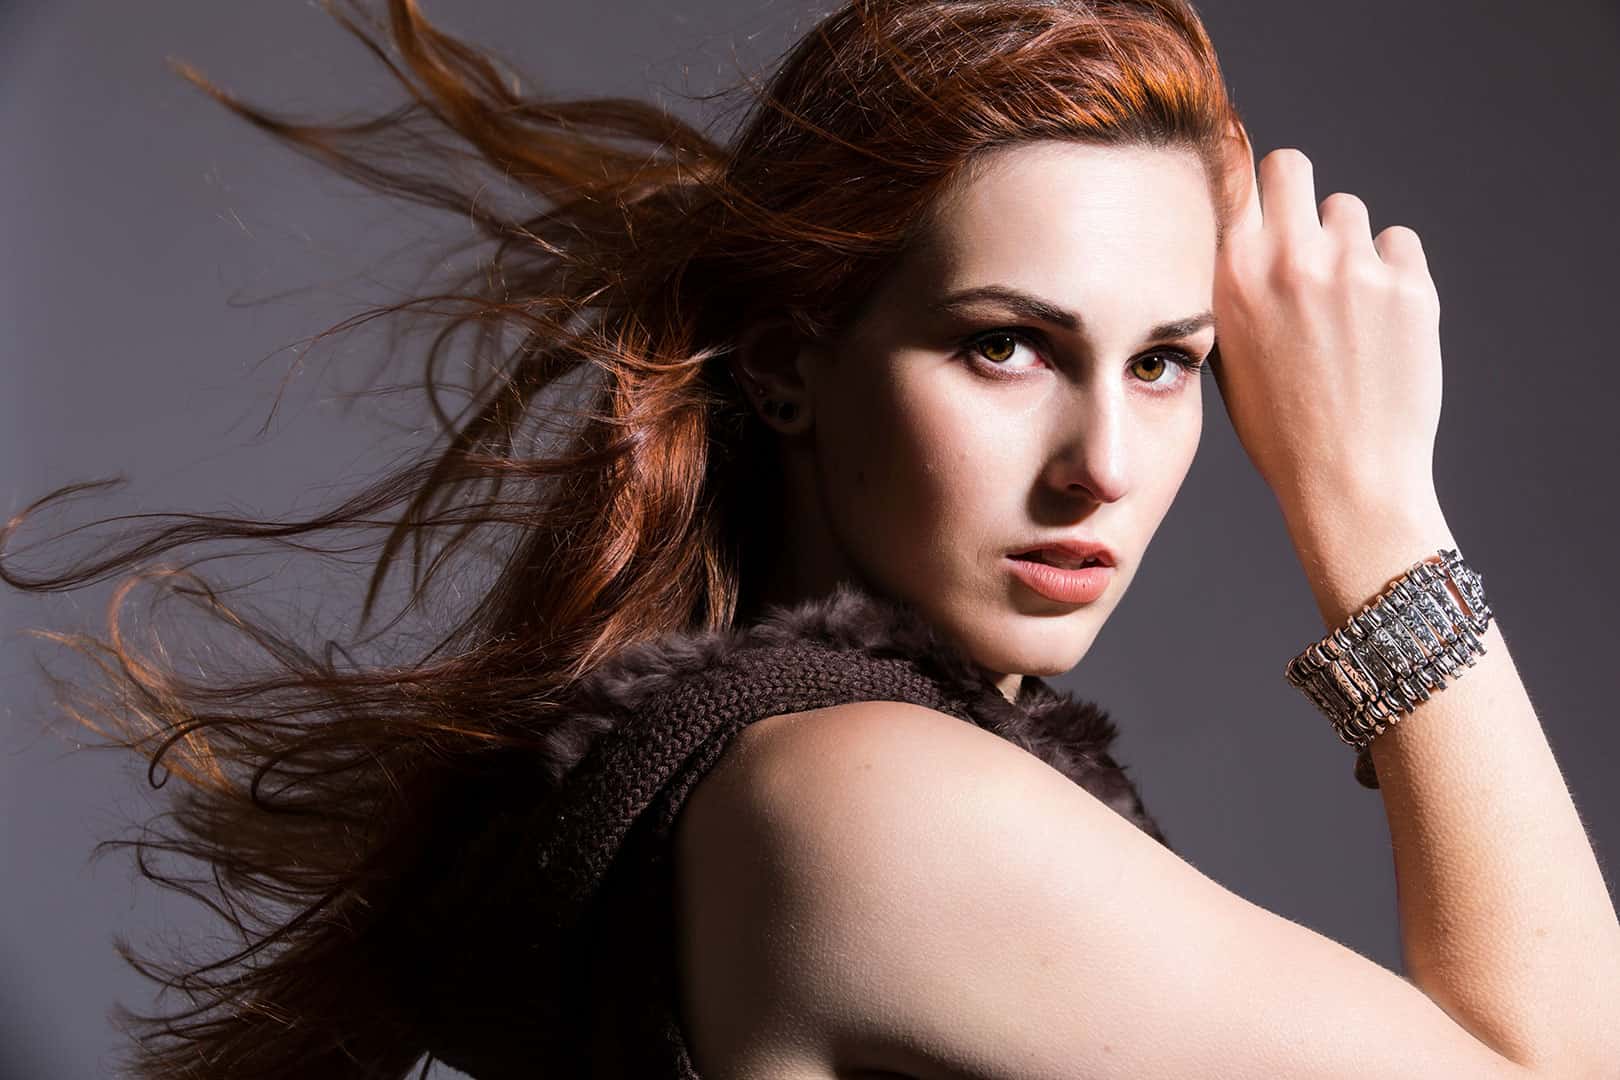 dramatic studio fashion image of woman with hair blowing